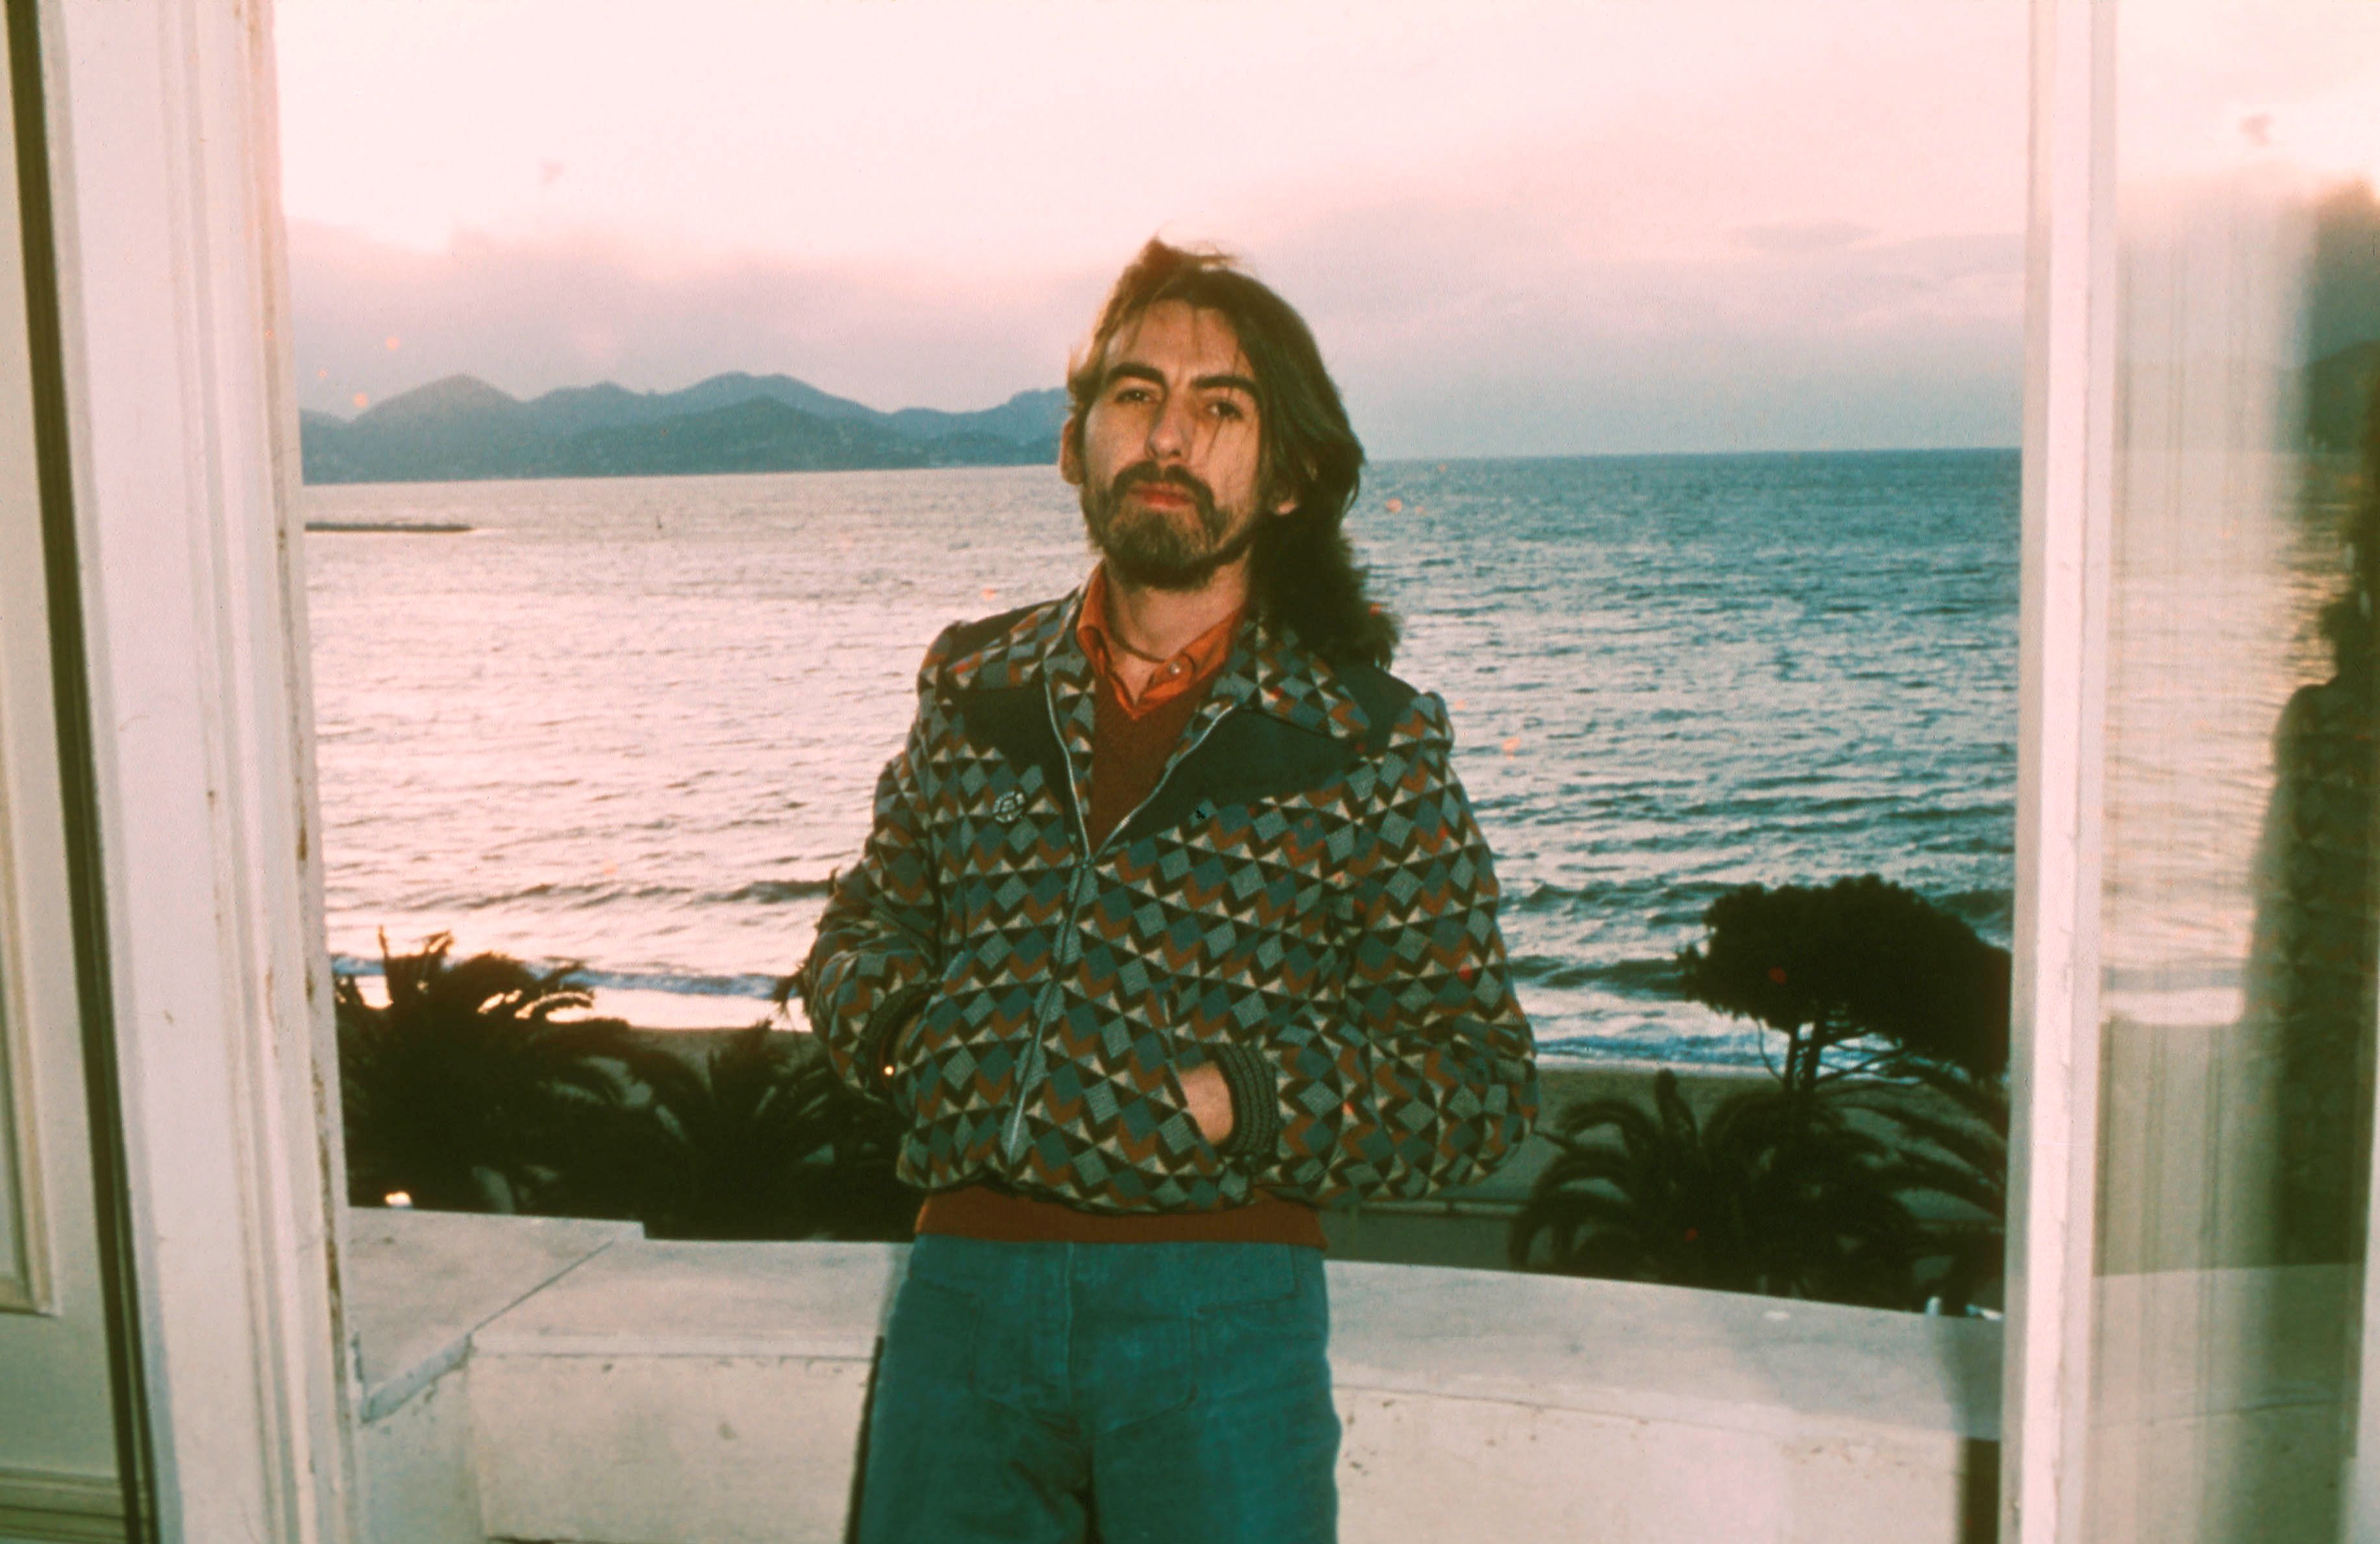 George Harrison poses with his hands in his jacket pockets in front of the ocean.